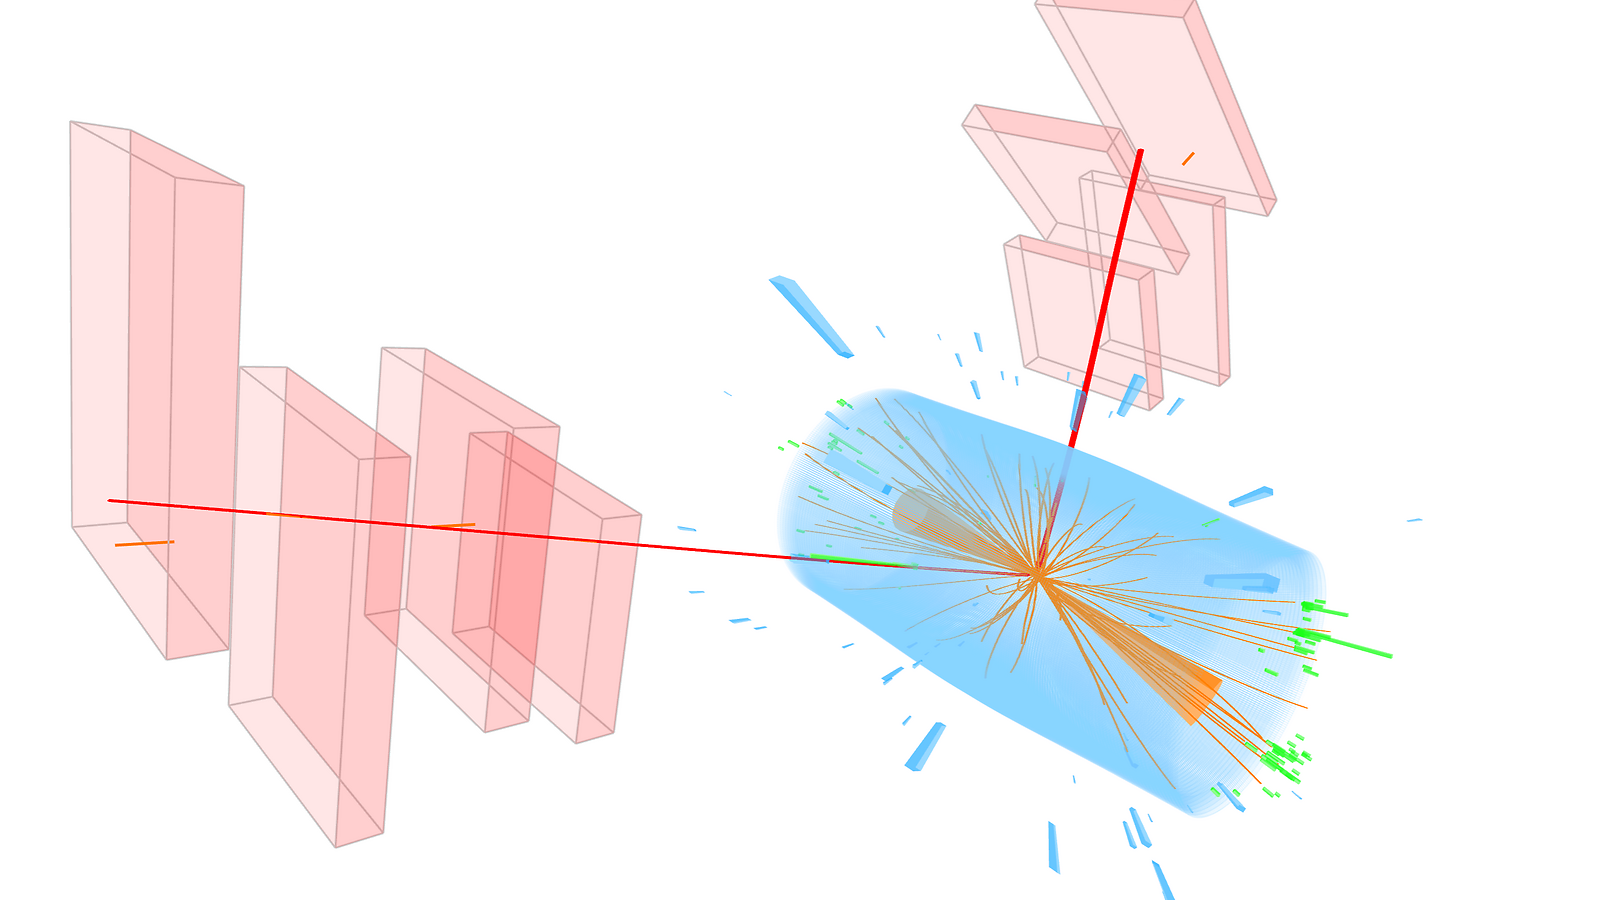 A new view of the Higgs boson